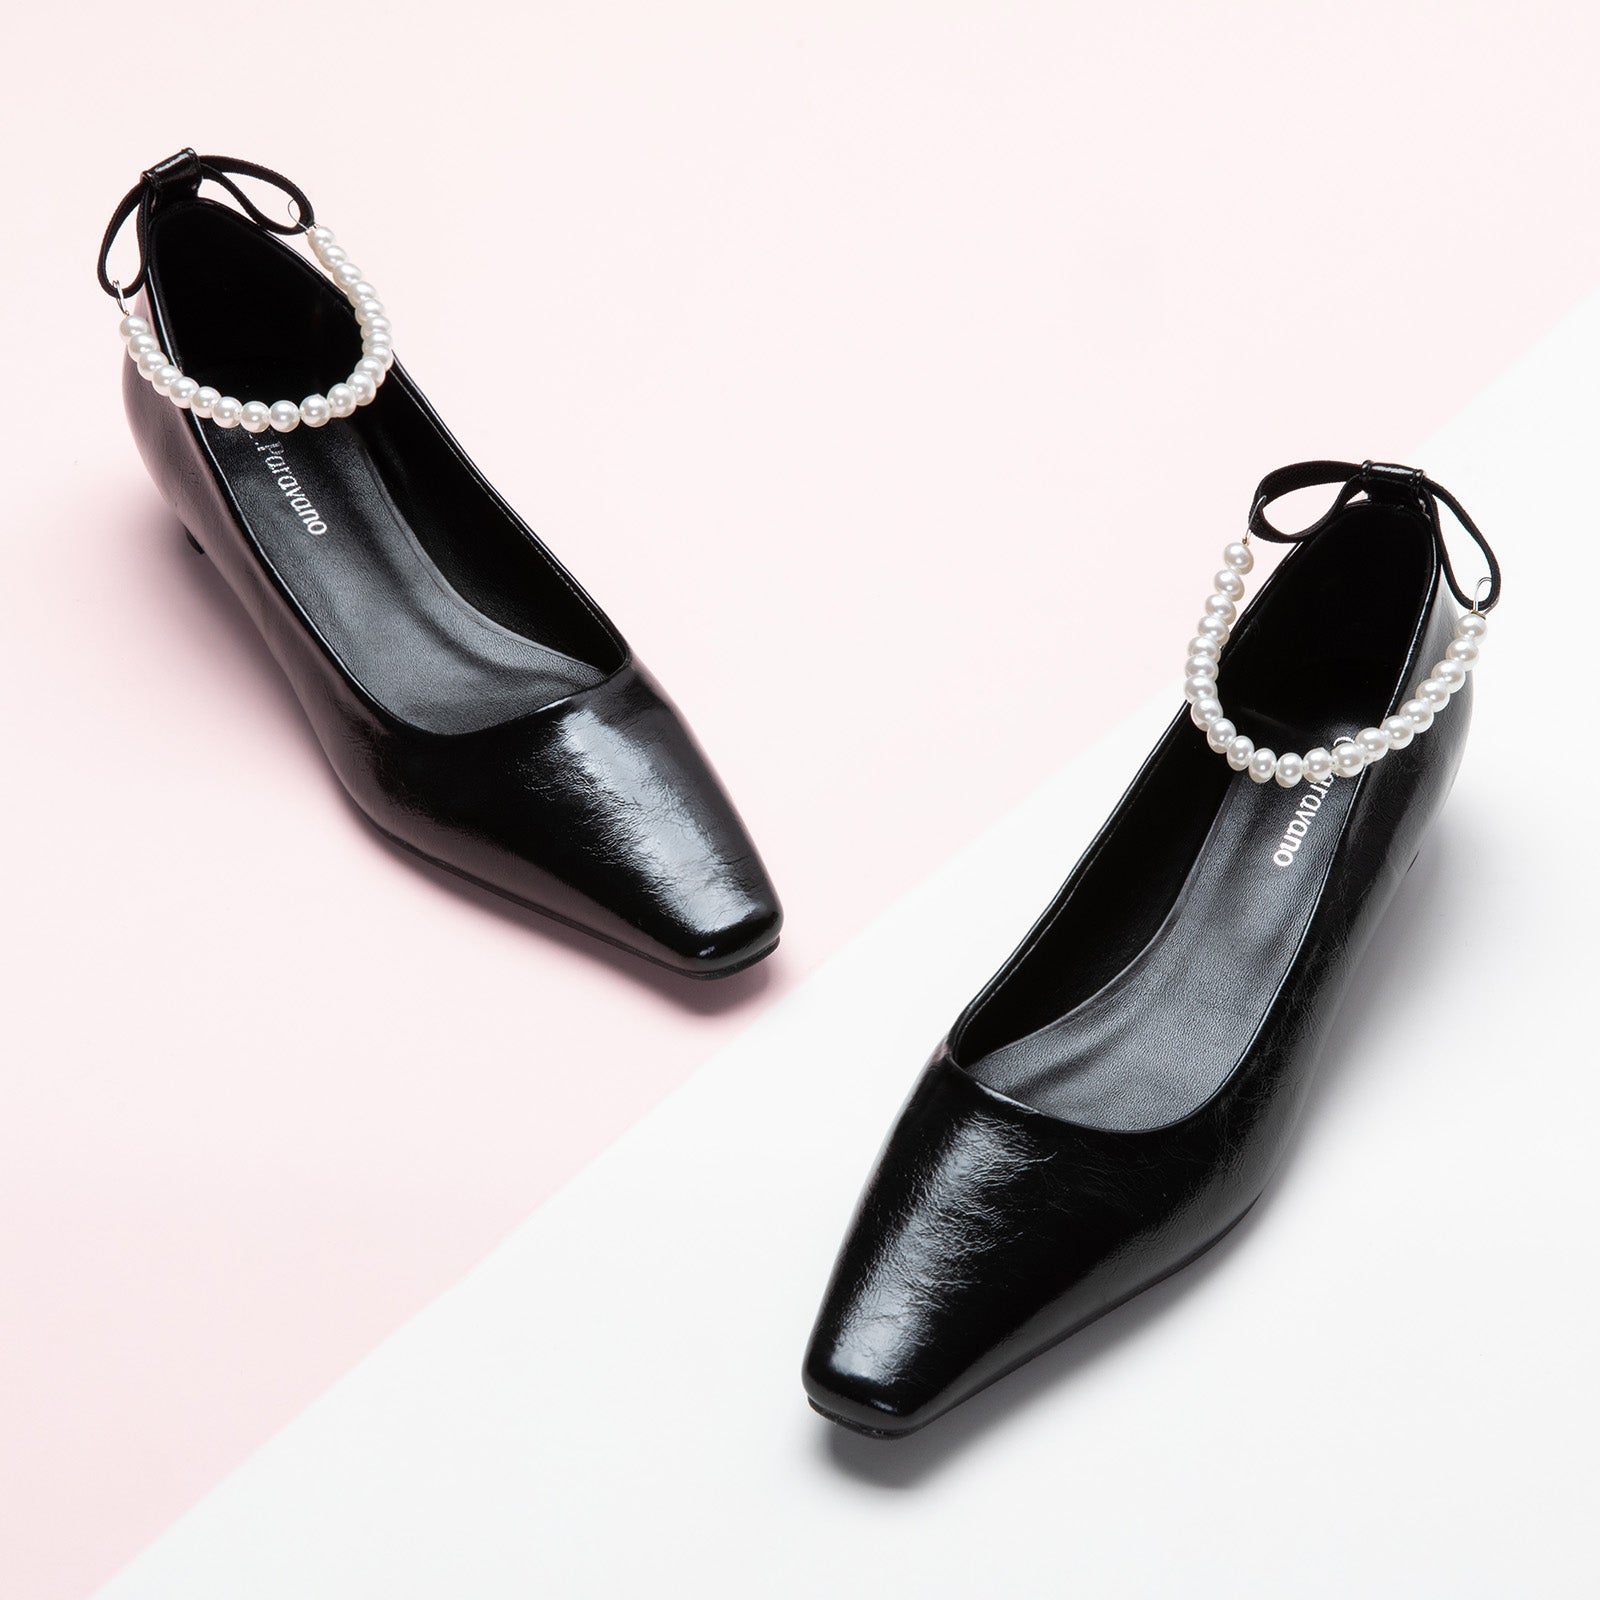  Pearl Straps Low Heel in Black, a modern and edgy option for city living with a touch of sophistication